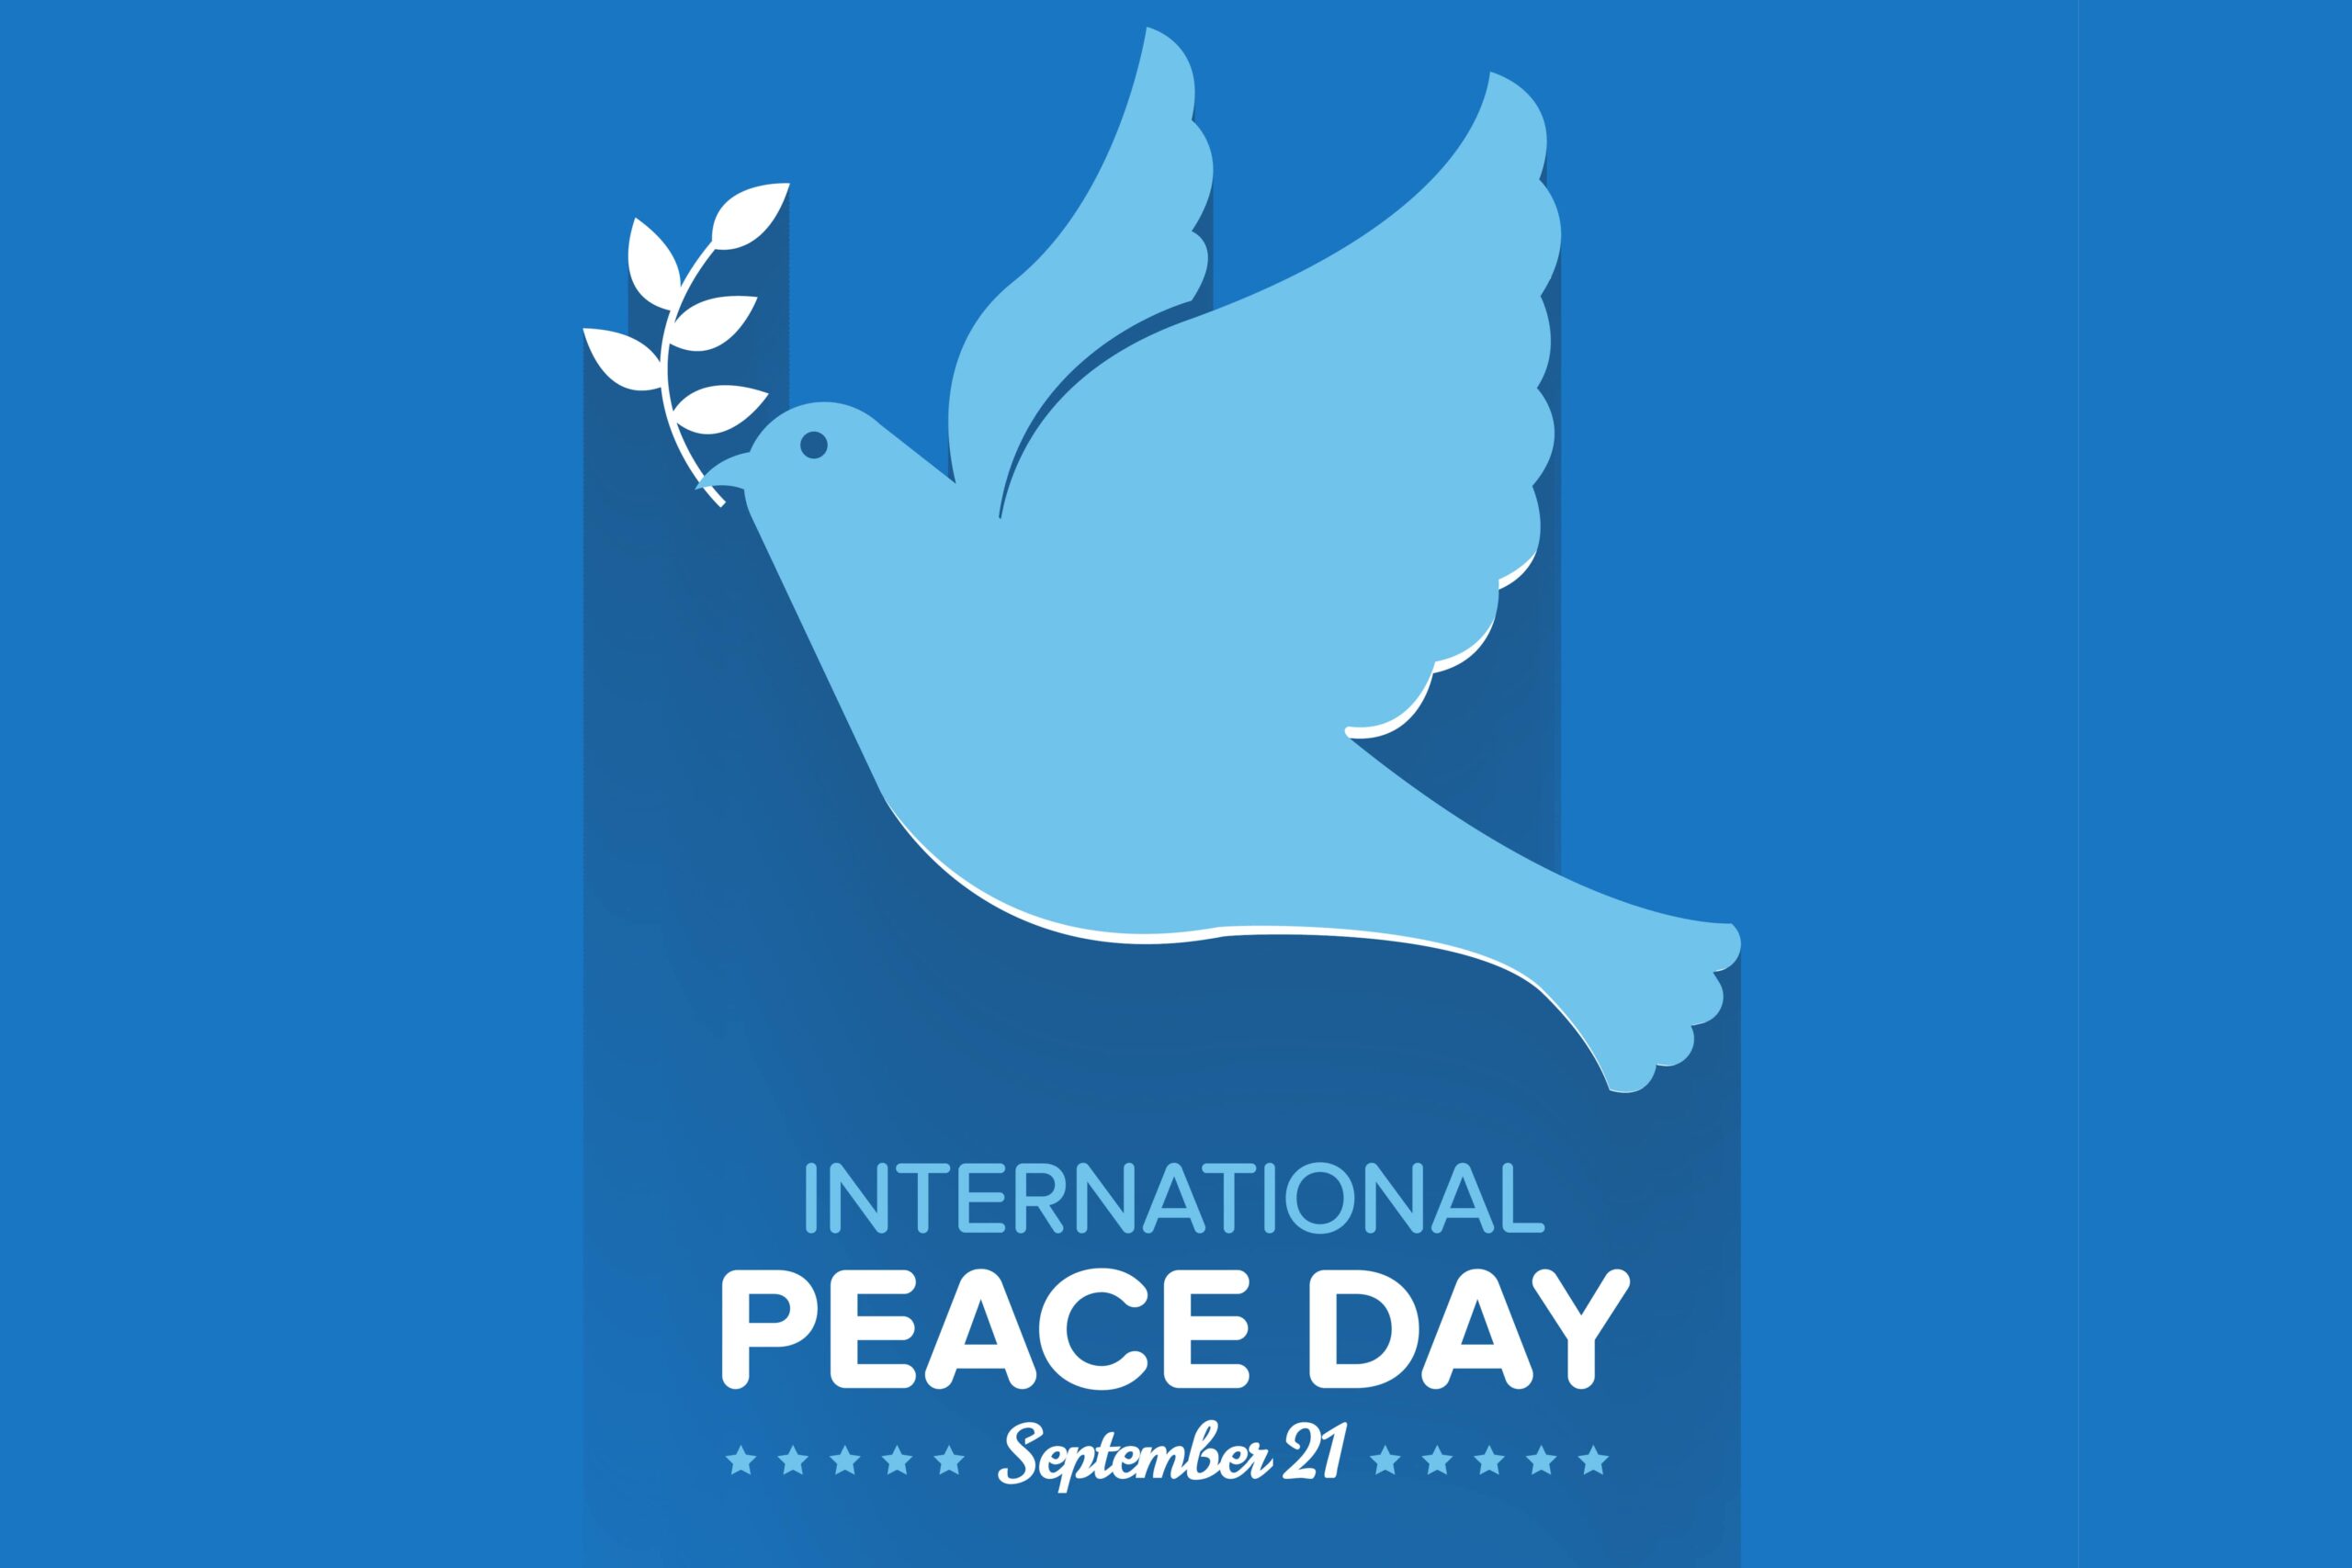 International Day of Peace ICA Agency Alliance, Inc.